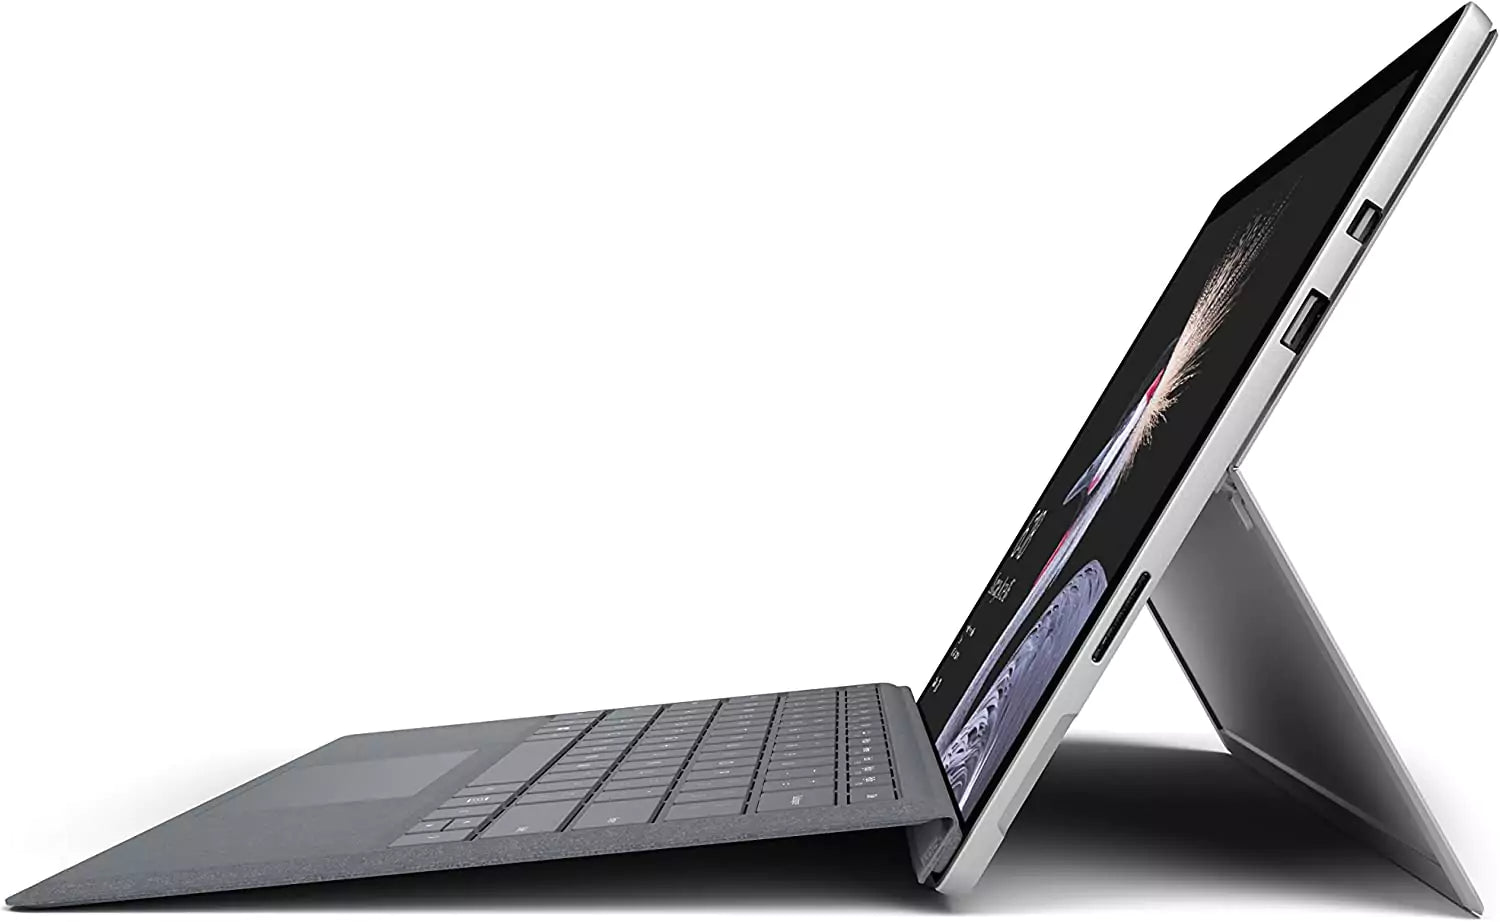 Microsoft Surface Pro 5 1807 Convertible 2 in 1 12.3